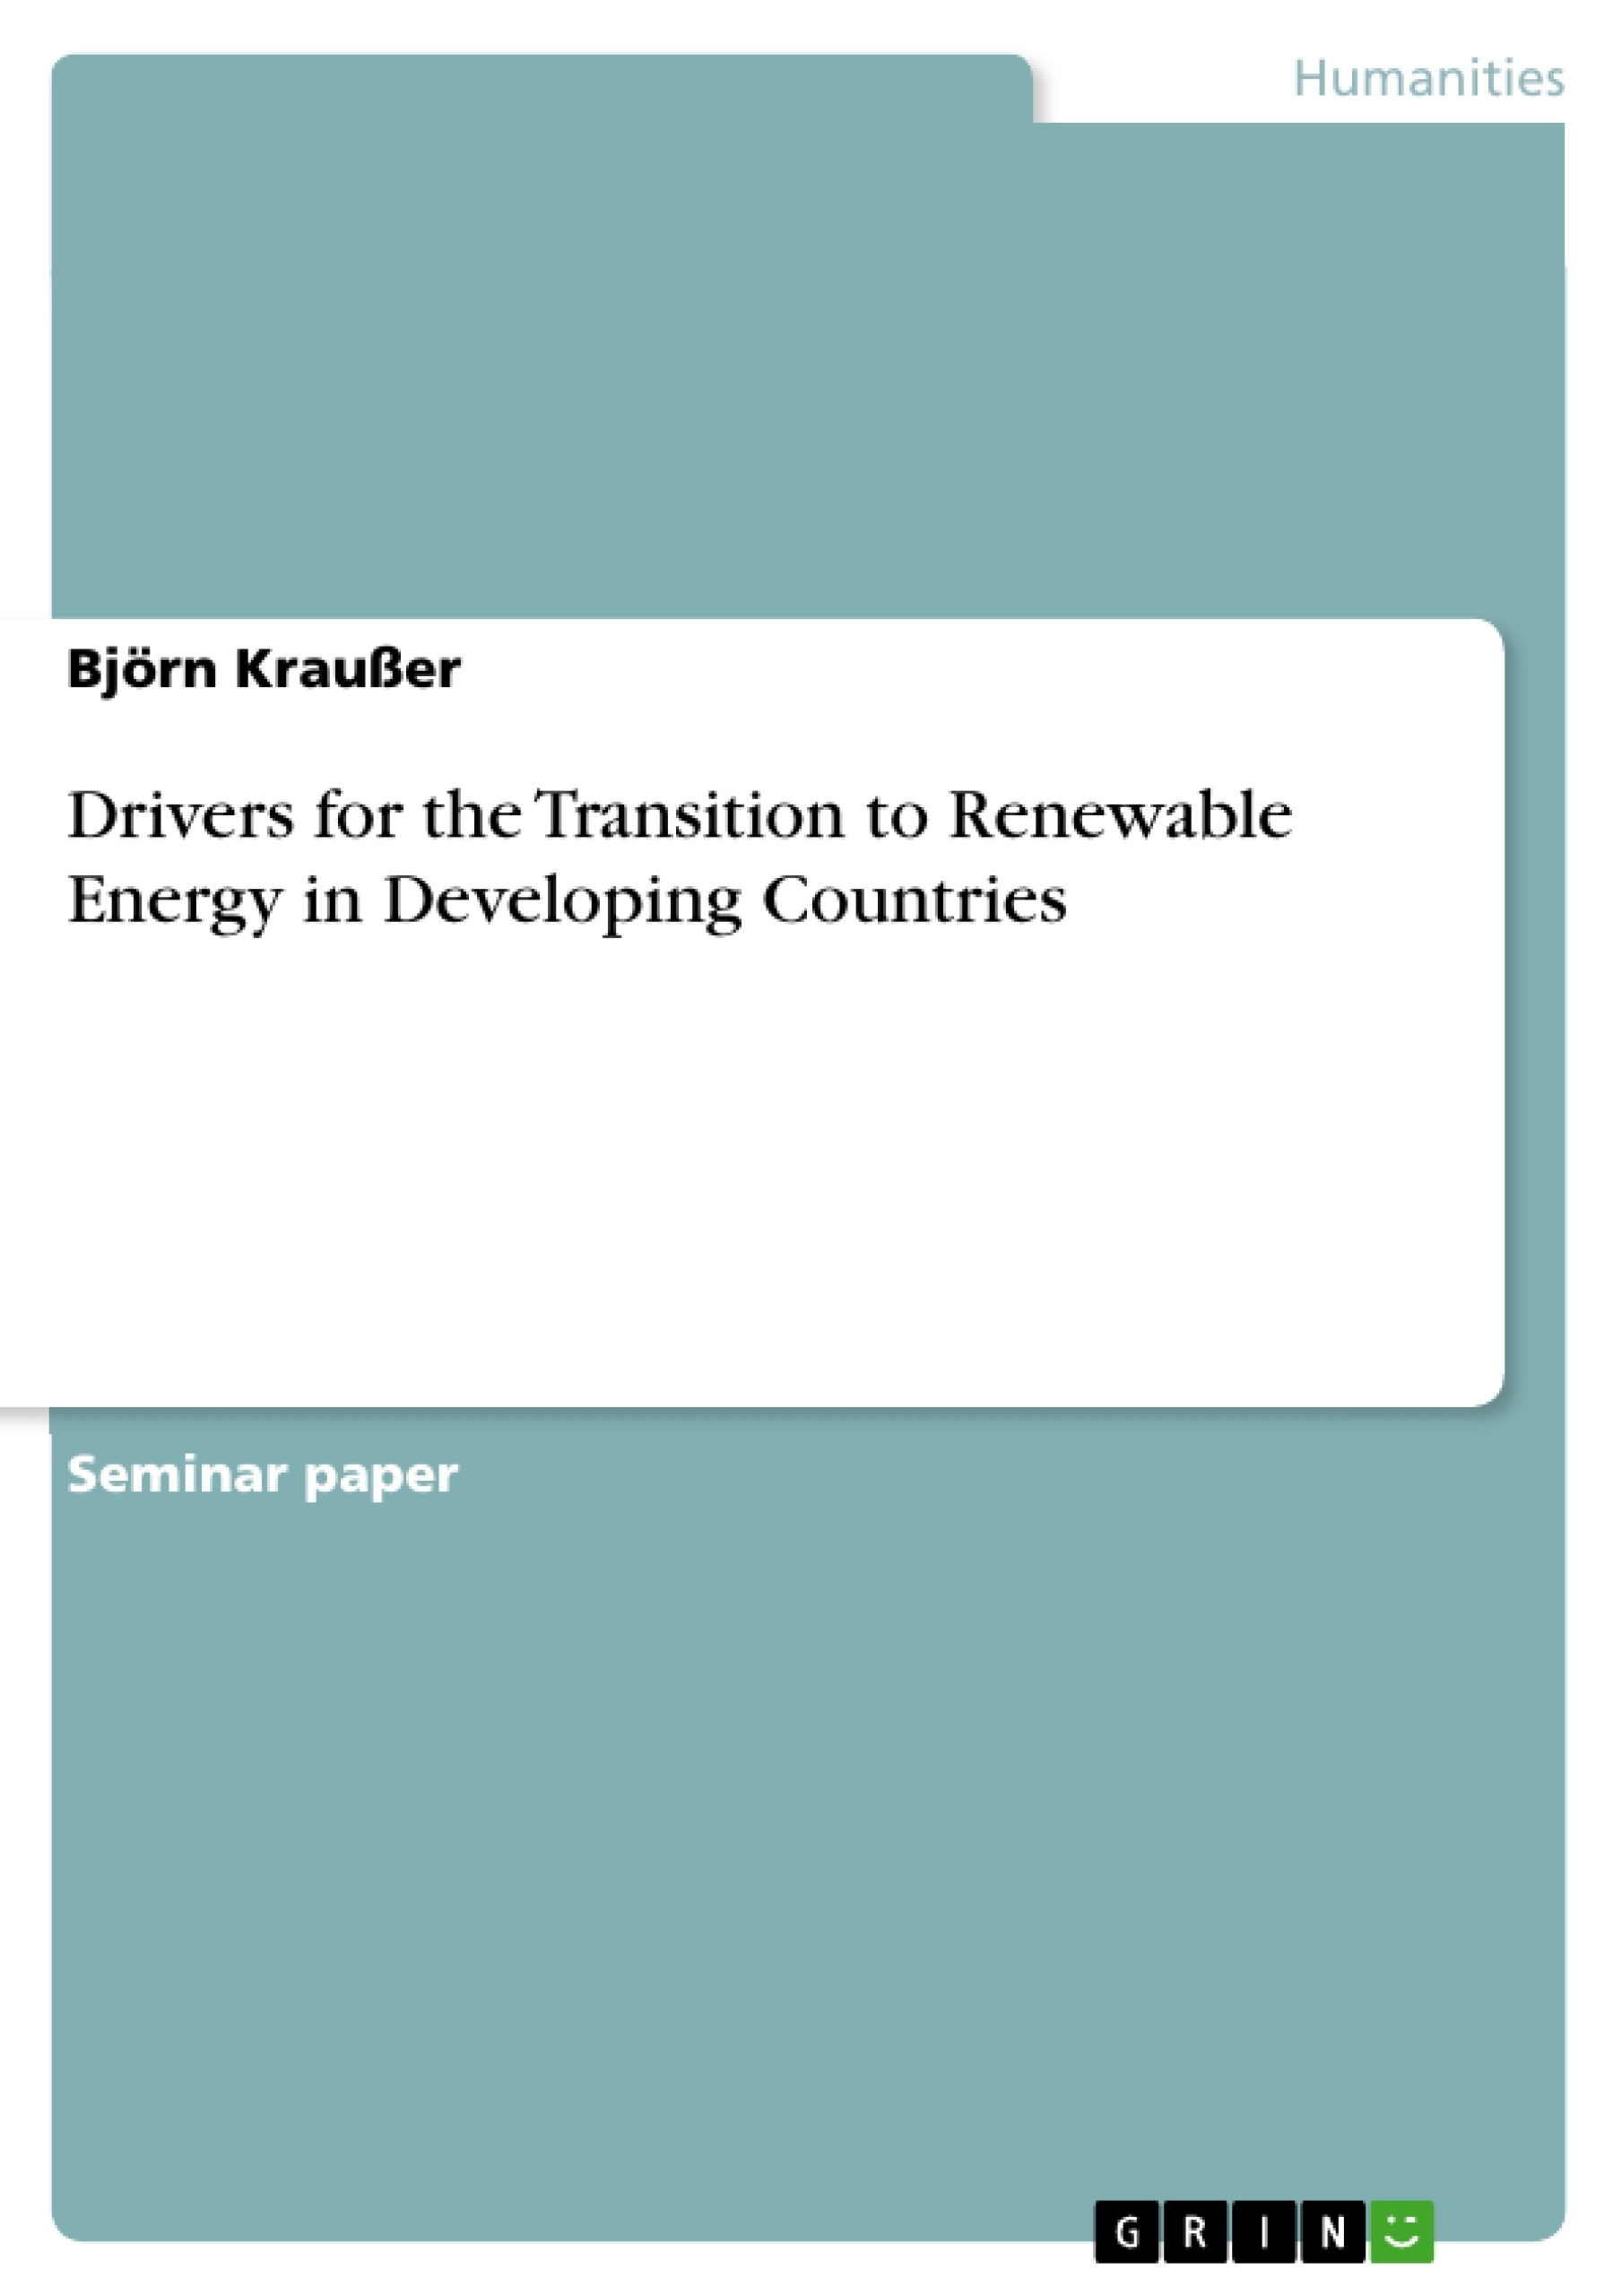 Title: Drivers for the Transition to Renewable Energy in Developing Countries